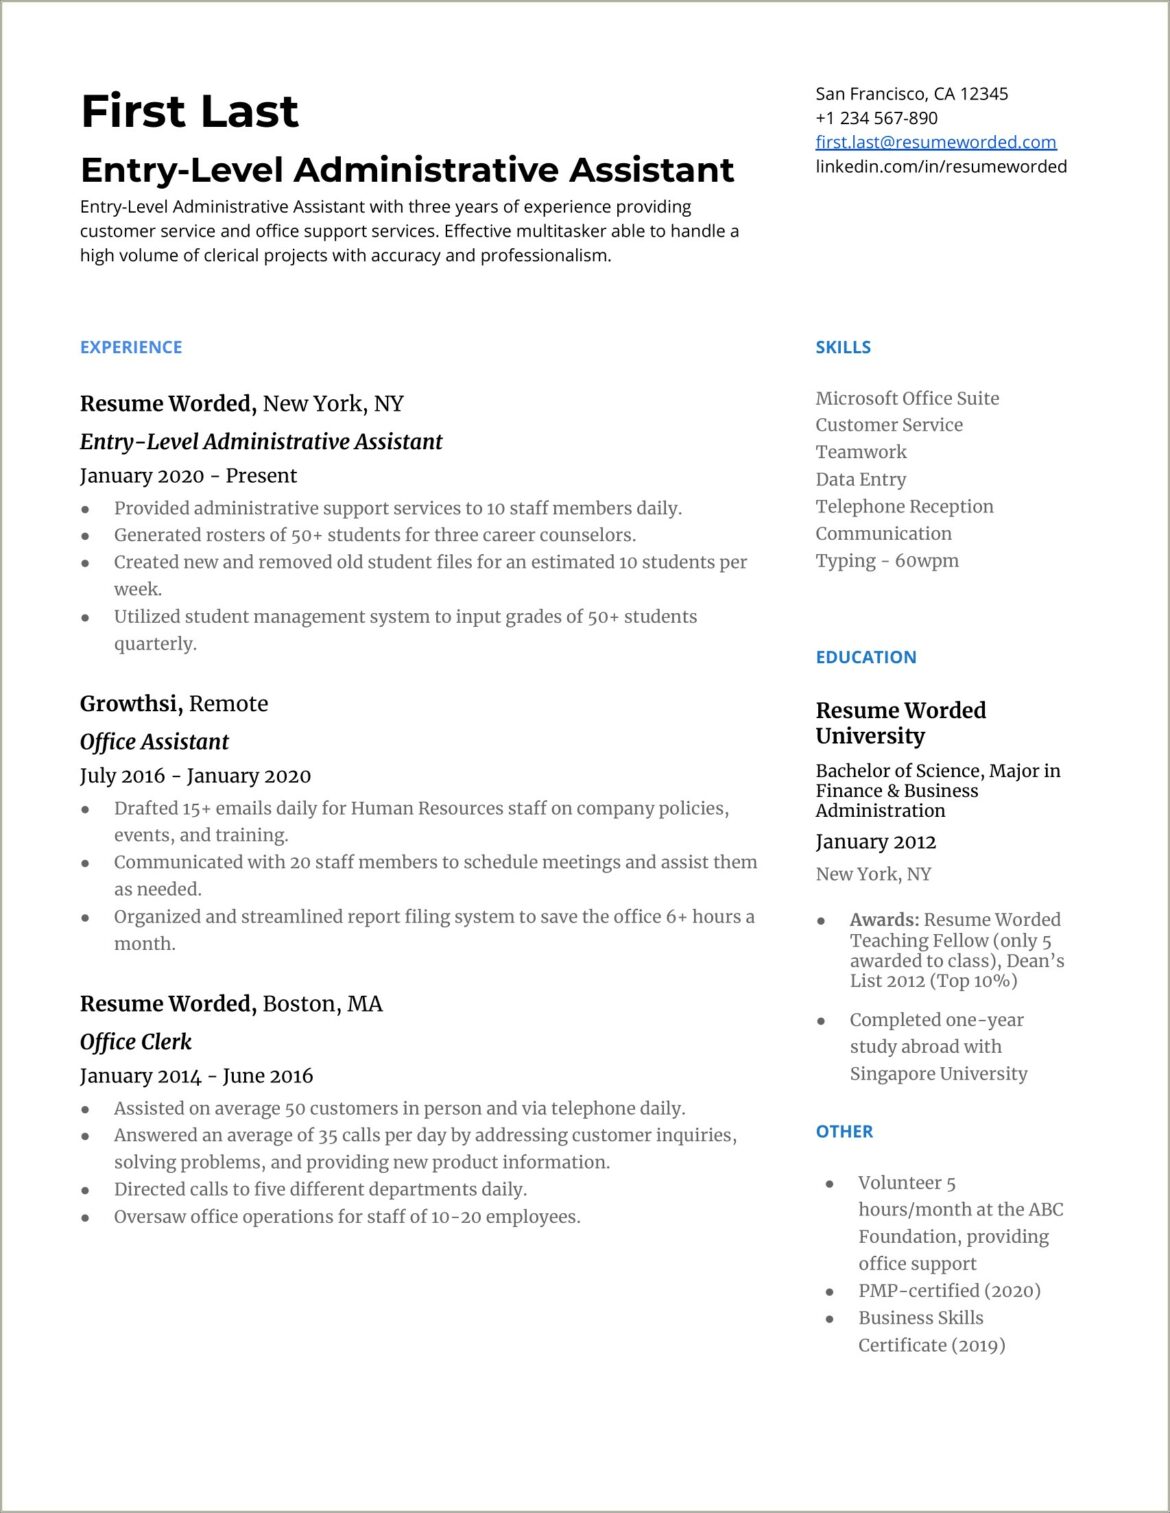 Sample Resume Summary For Office Assistant